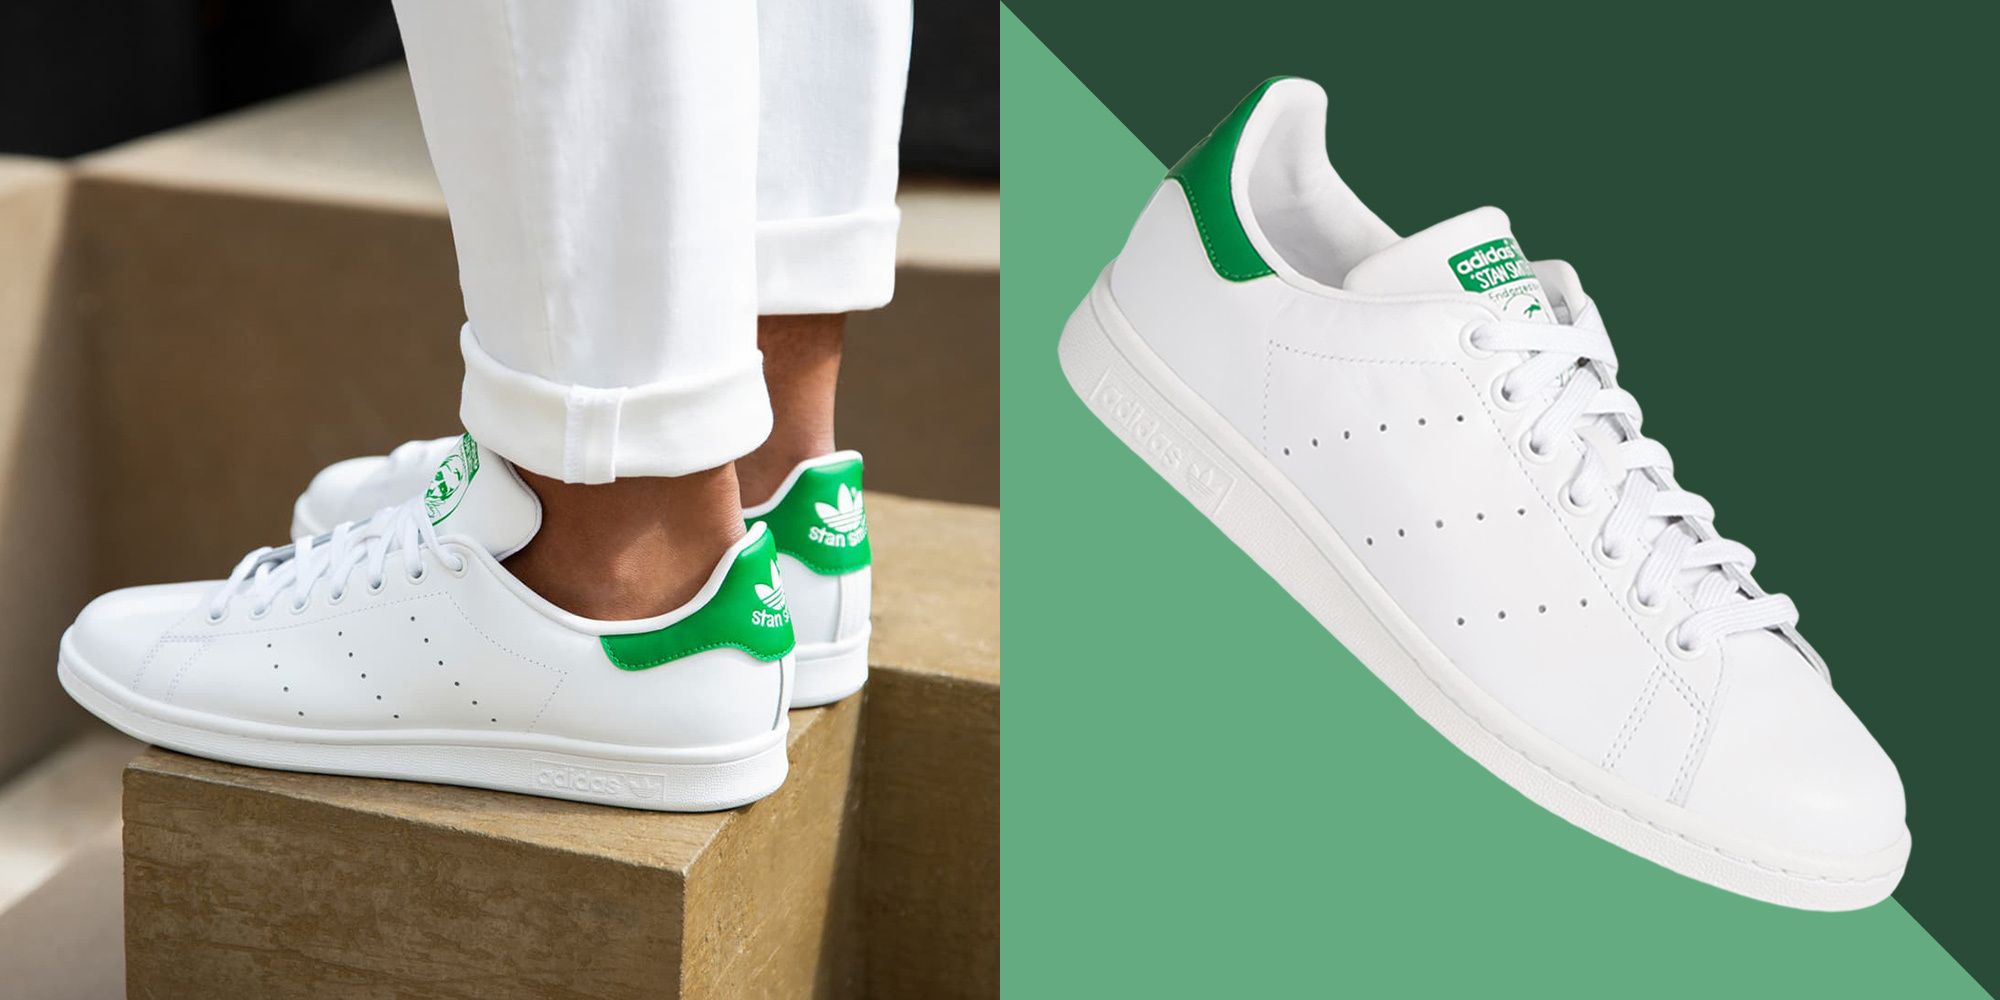 Adidas Stan Smiths Are Now 20% Off at 